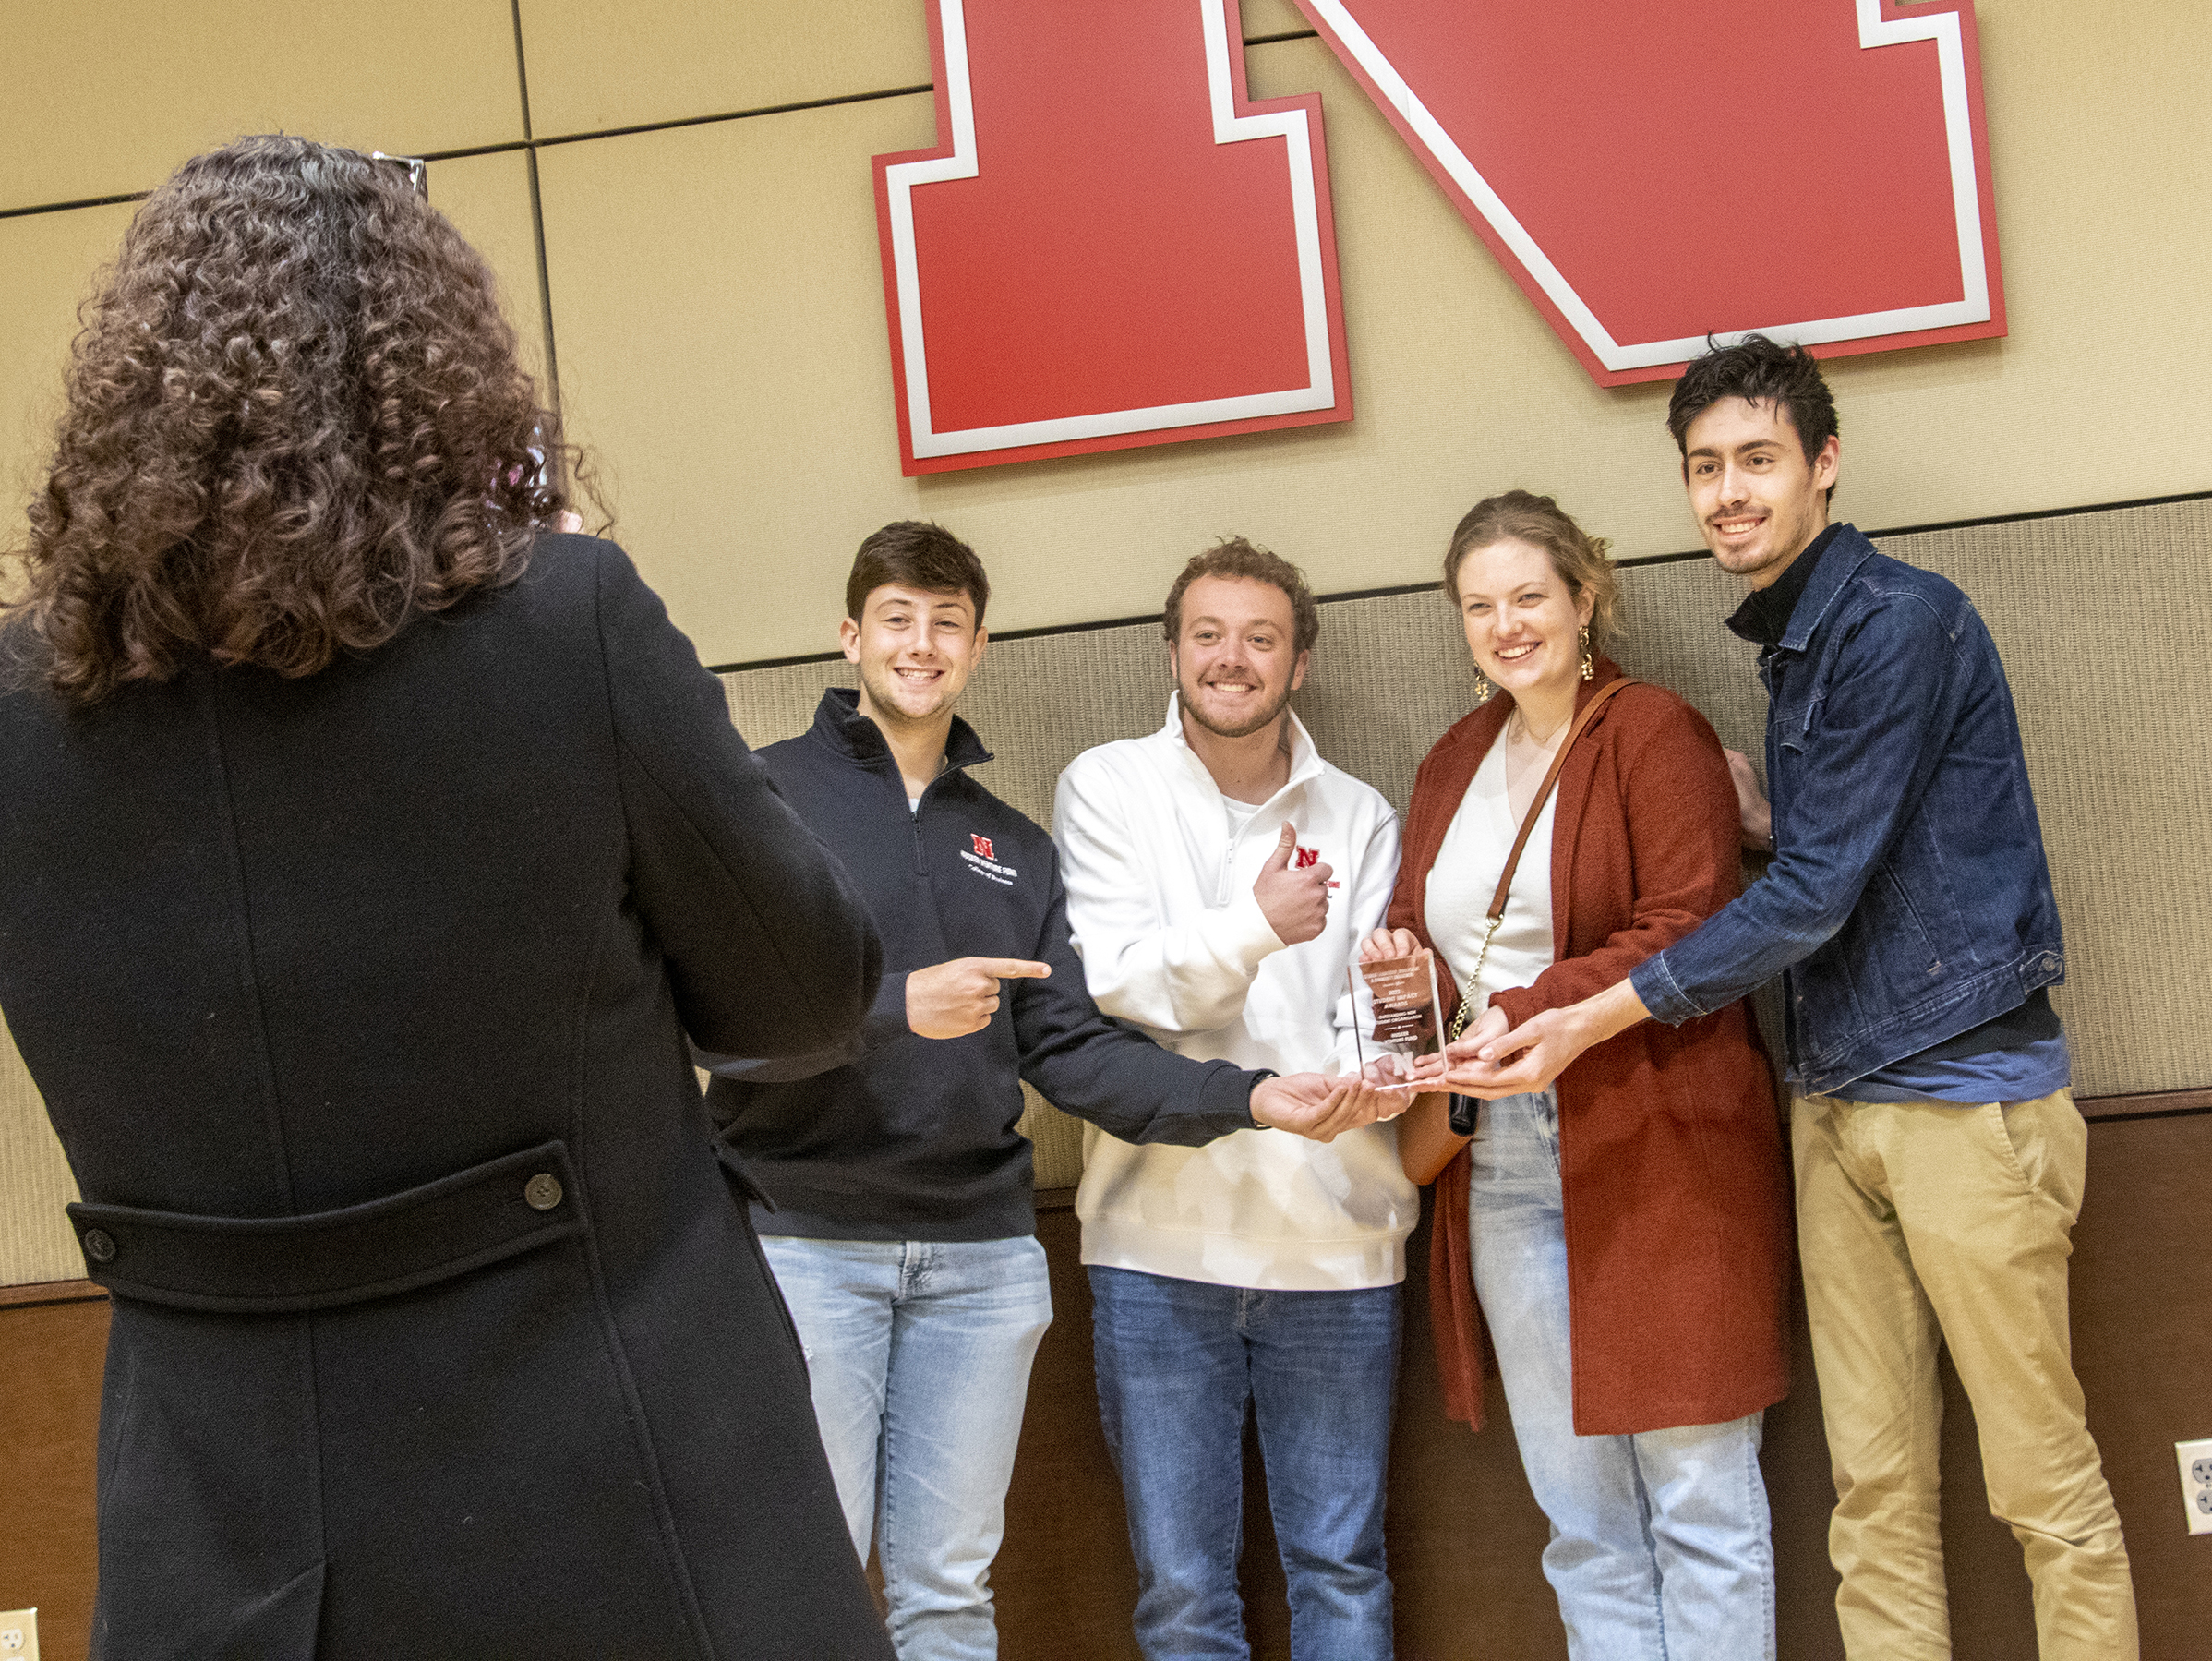 Husker Venture Fund won the Outanding New Student Organization Award at the Student Impact Awards on April 14, 2022. [Mike Jackson | Student Affairs]